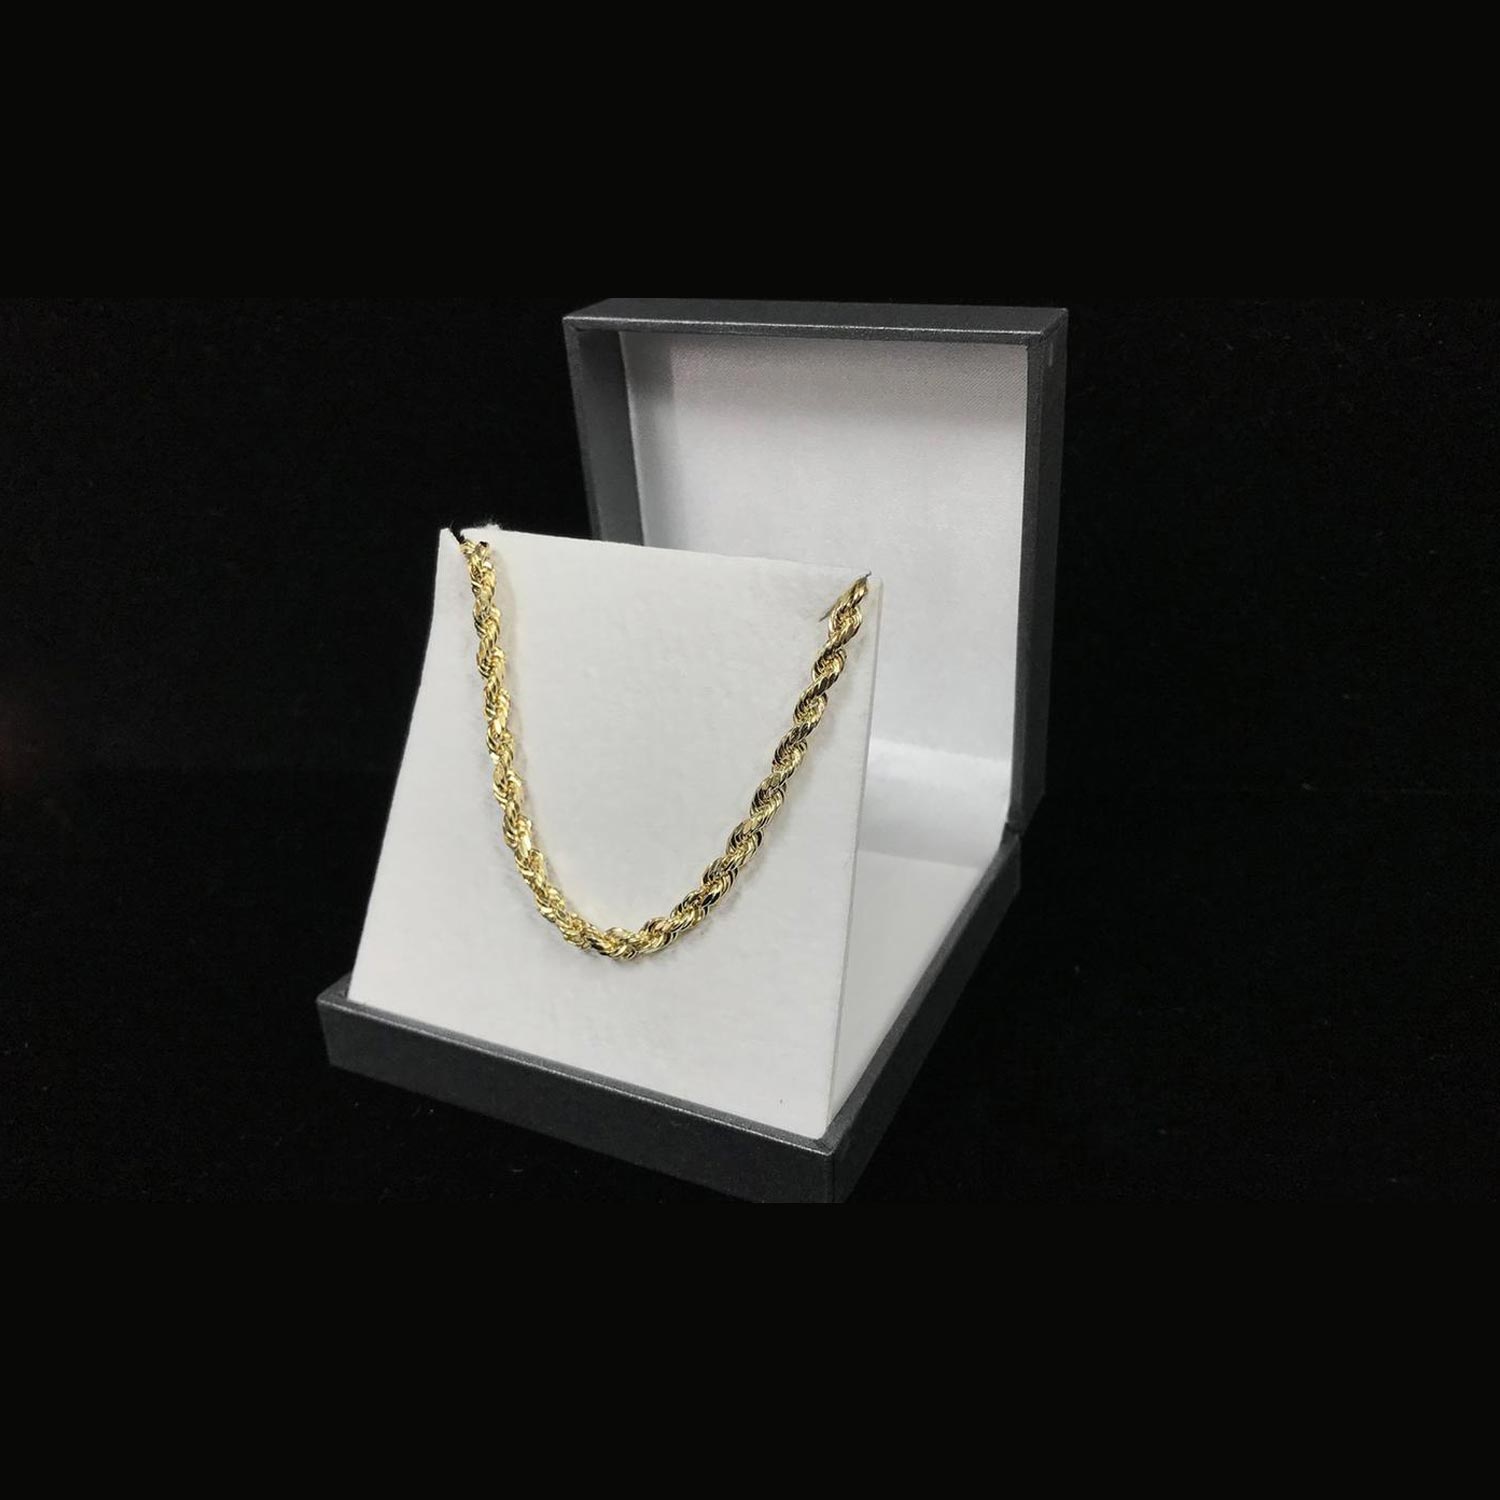 Italian 10K Gold 4MM Rope Chain Necklace